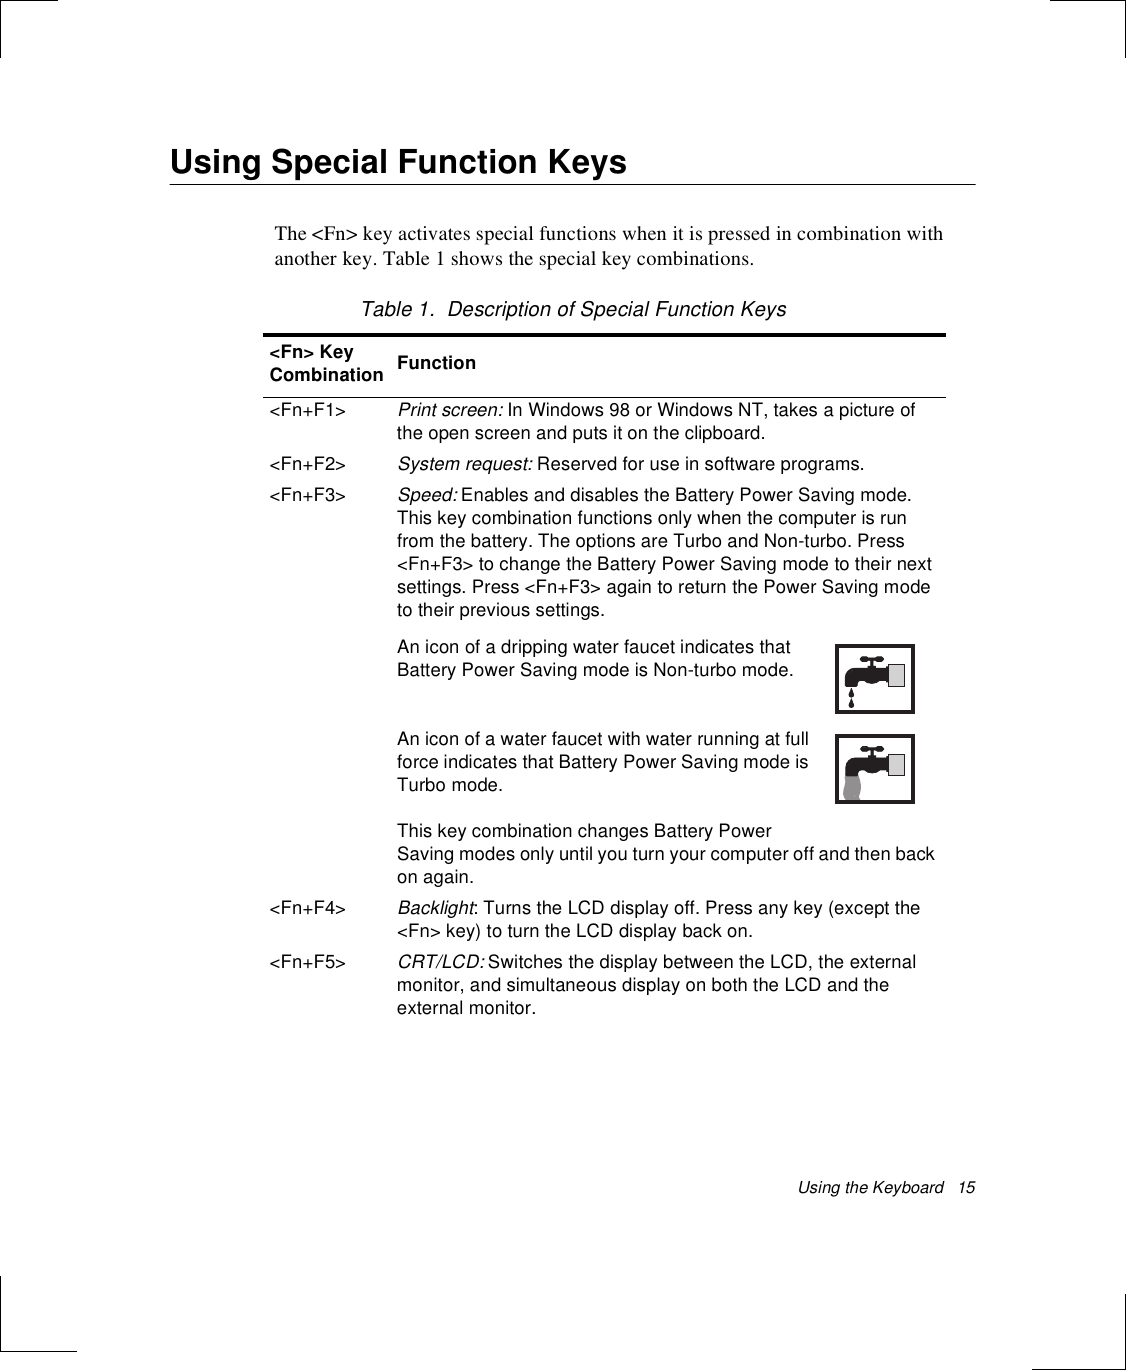 Using the Keyboard   15Using Special Function KeysThe &lt;Fn&gt; key activates special functions when it is pressed in combination with another key. Table 1 shows the special key combinations.Table 1.  Description of Special Function Keys&lt;Fn&gt; Key Combination Function&lt;Fn+F1&gt;Print screen: In Windows 98 or Windows NT, takes a picture of the open screen and puts it on the clipboard.&lt;Fn+F2&gt;System request: Reserved for use in software programs.&lt;Fn+F3&gt;Speed: Enables and disables the Battery Power Saving mode. This key combination functions only when the computer is run from the battery. The options are Turbo and Non-turbo. Press &lt;Fn+F3&gt; to change the Battery Power Saving mode to their next settings. Press &lt;Fn+F3&gt; again to return the Power Saving mode to their previous settings. An icon of a dripping water faucet indicates that Battery Power Saving mode is Non-turbo mode. An icon of a water faucet with water running at full force indicates that Battery Power Saving mode is Turbo mode. This key combination changes Battery Power Saving modes only until you turn your computer off and then back on again. &lt;Fn+F4&gt;Backlight: Turns the LCD display off. Press any key (except the &lt;Fn&gt; key) to turn the LCD display back on.&lt;Fn+F5&gt; CRT/LCD: Switches the display between the LCD, the external monitor, and simultaneous display on both the LCD and the external monitor.